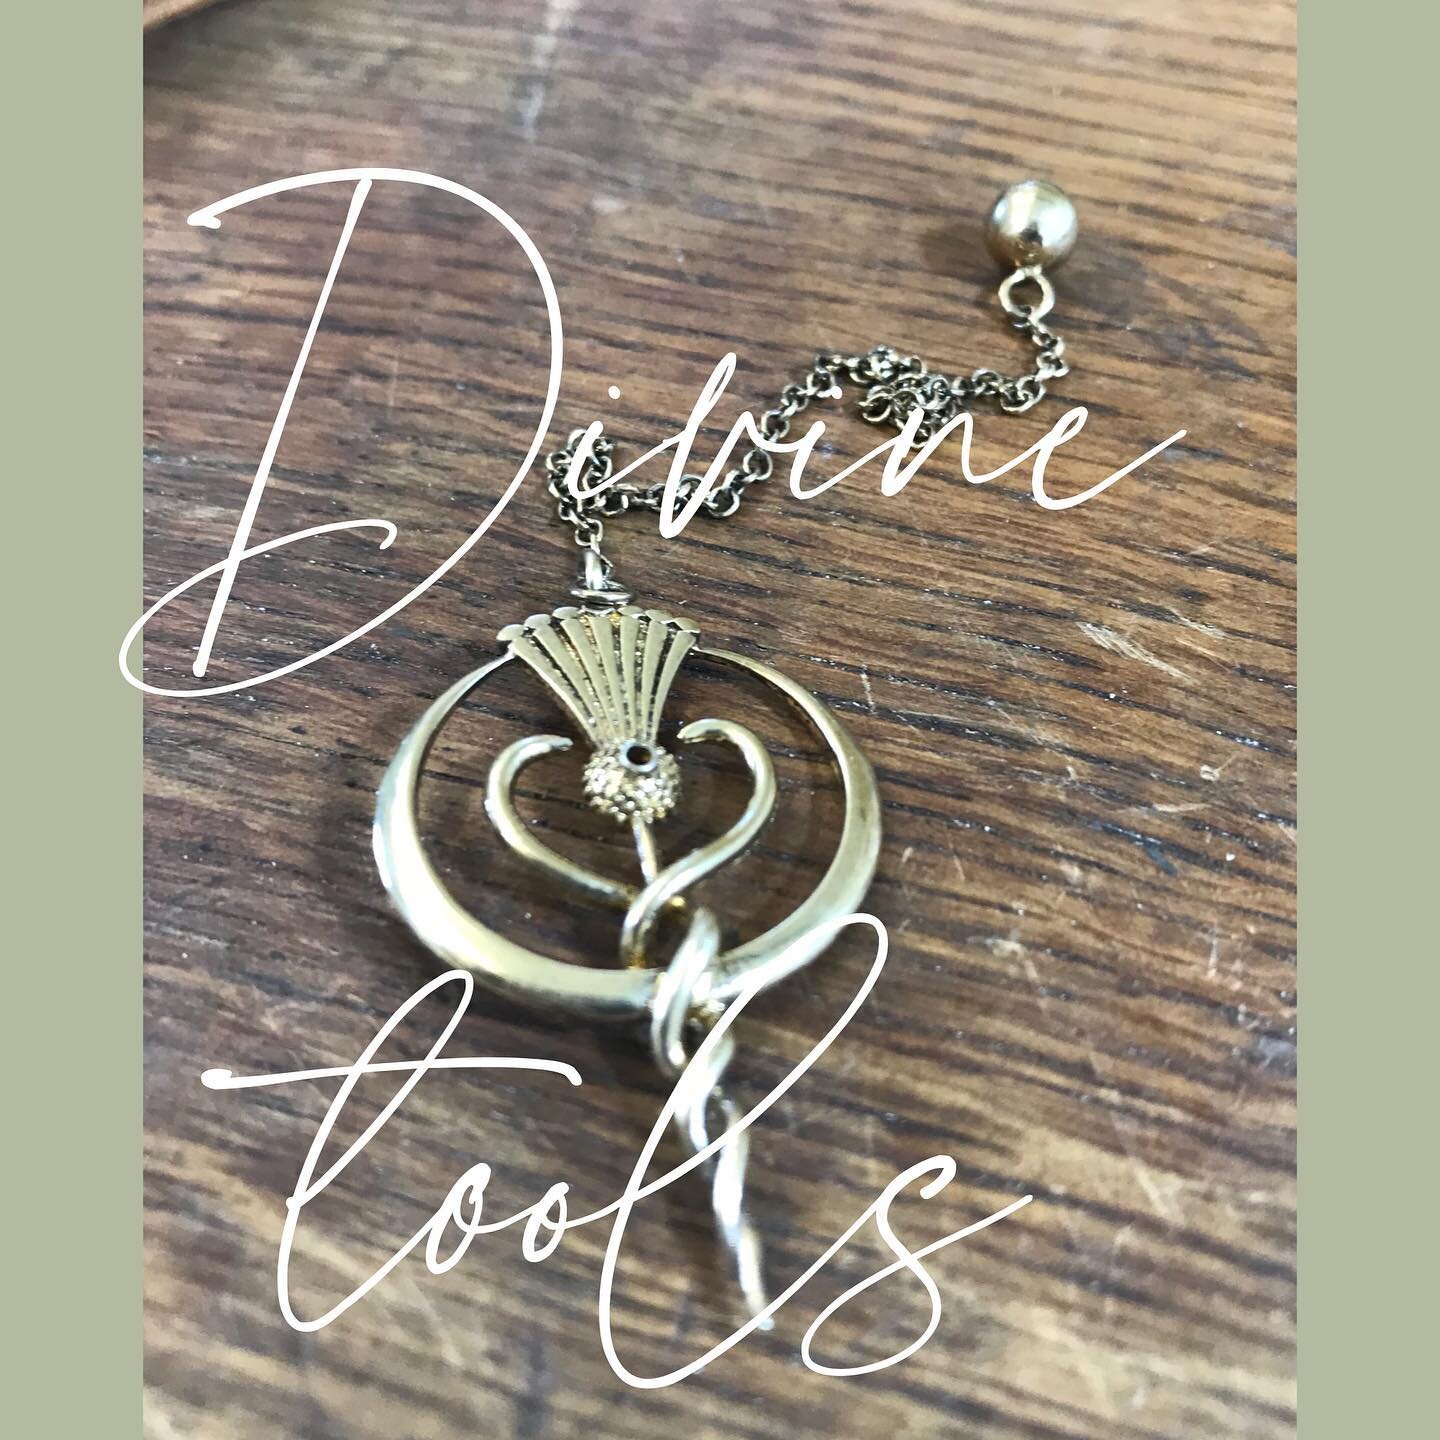 Angel of Healing Pendulum

Divine 

Dowse 

Available now in my shop 
Gold and Silver as pendulum or necklace, a rich in symbology delicate design connected to the angelic and elemental realms.

#divine #pendulum #dowse #nature #angel #gold #silver